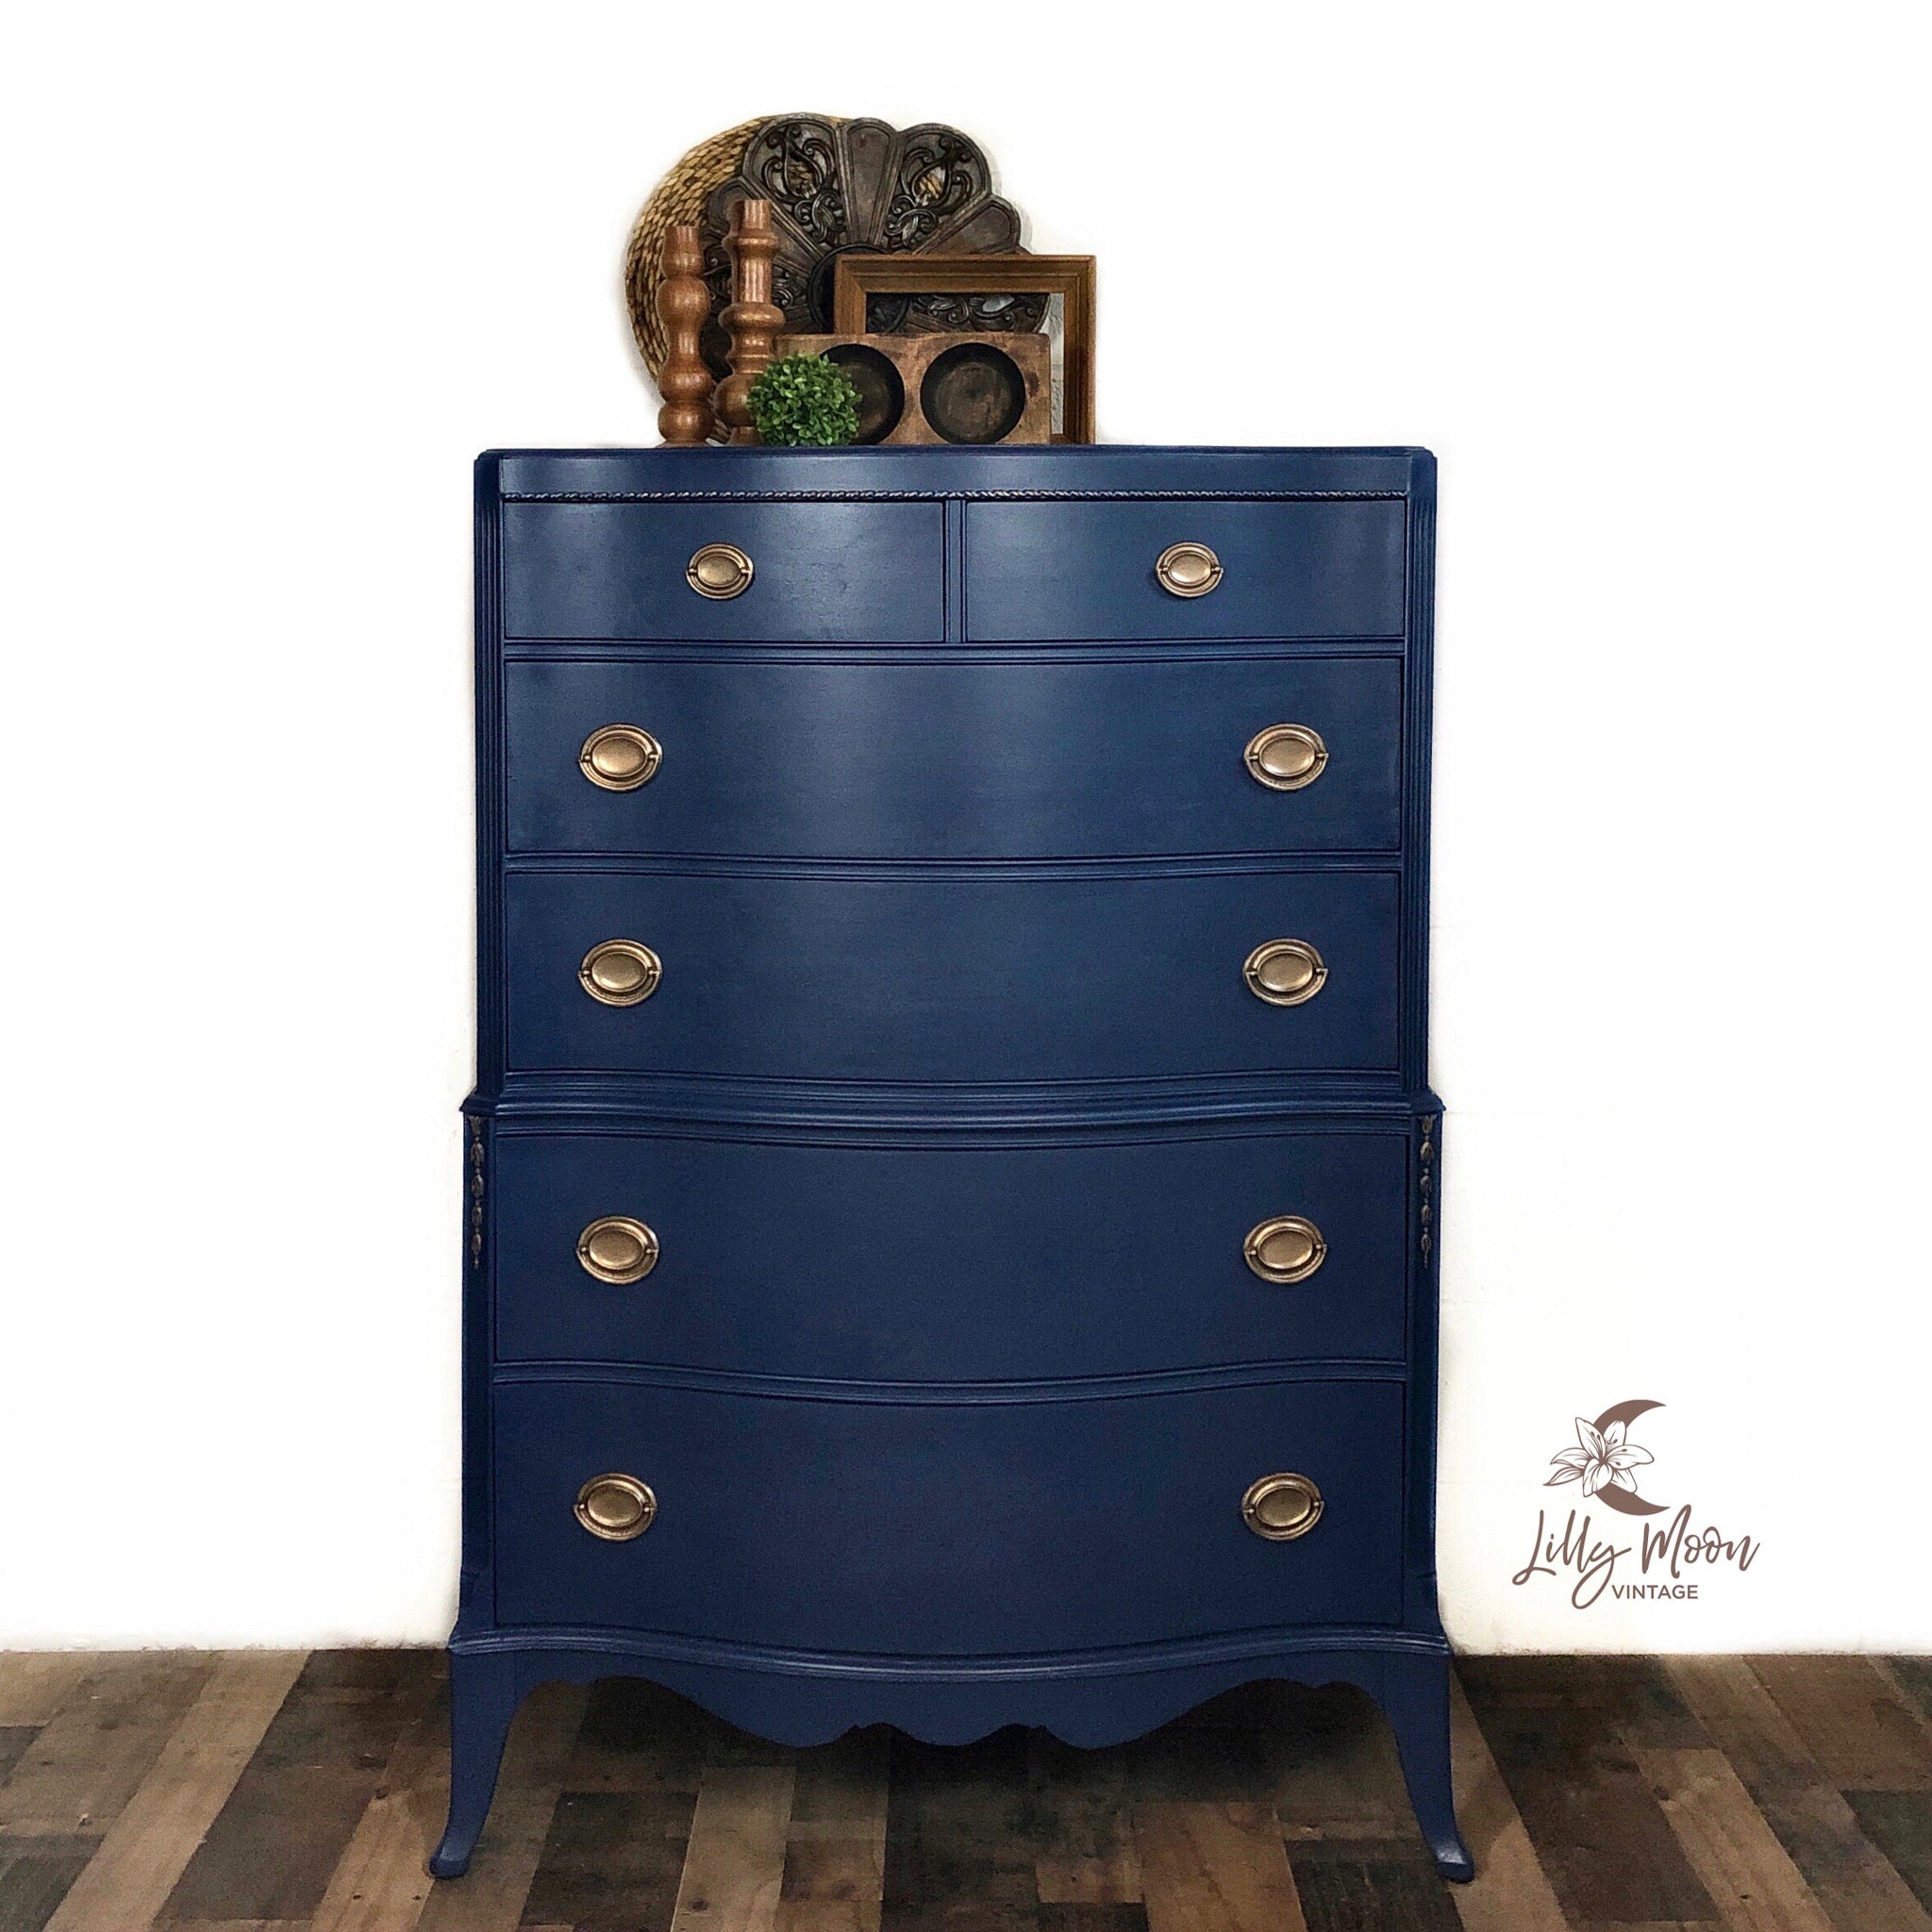 A vintage chest dresser refurbished by Lilly Moon Vintage features Dixie Belle's Bunker Hill Blue chalk mineral paint.